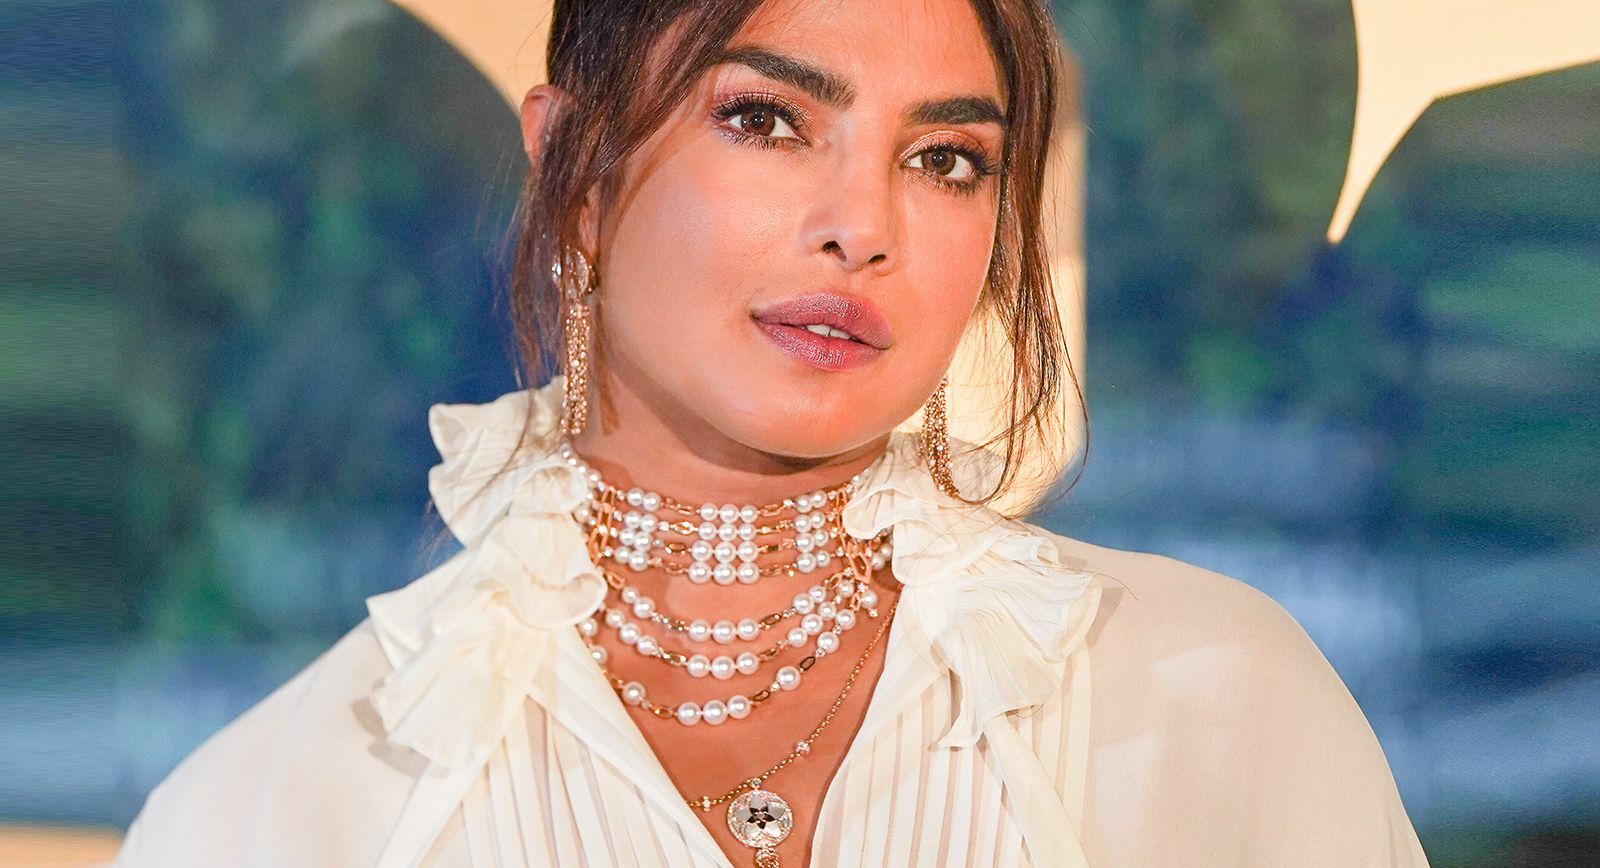 Actress Priyanka Chopra demonstrates the 'neck mess' trend in pearls and yellow gold 